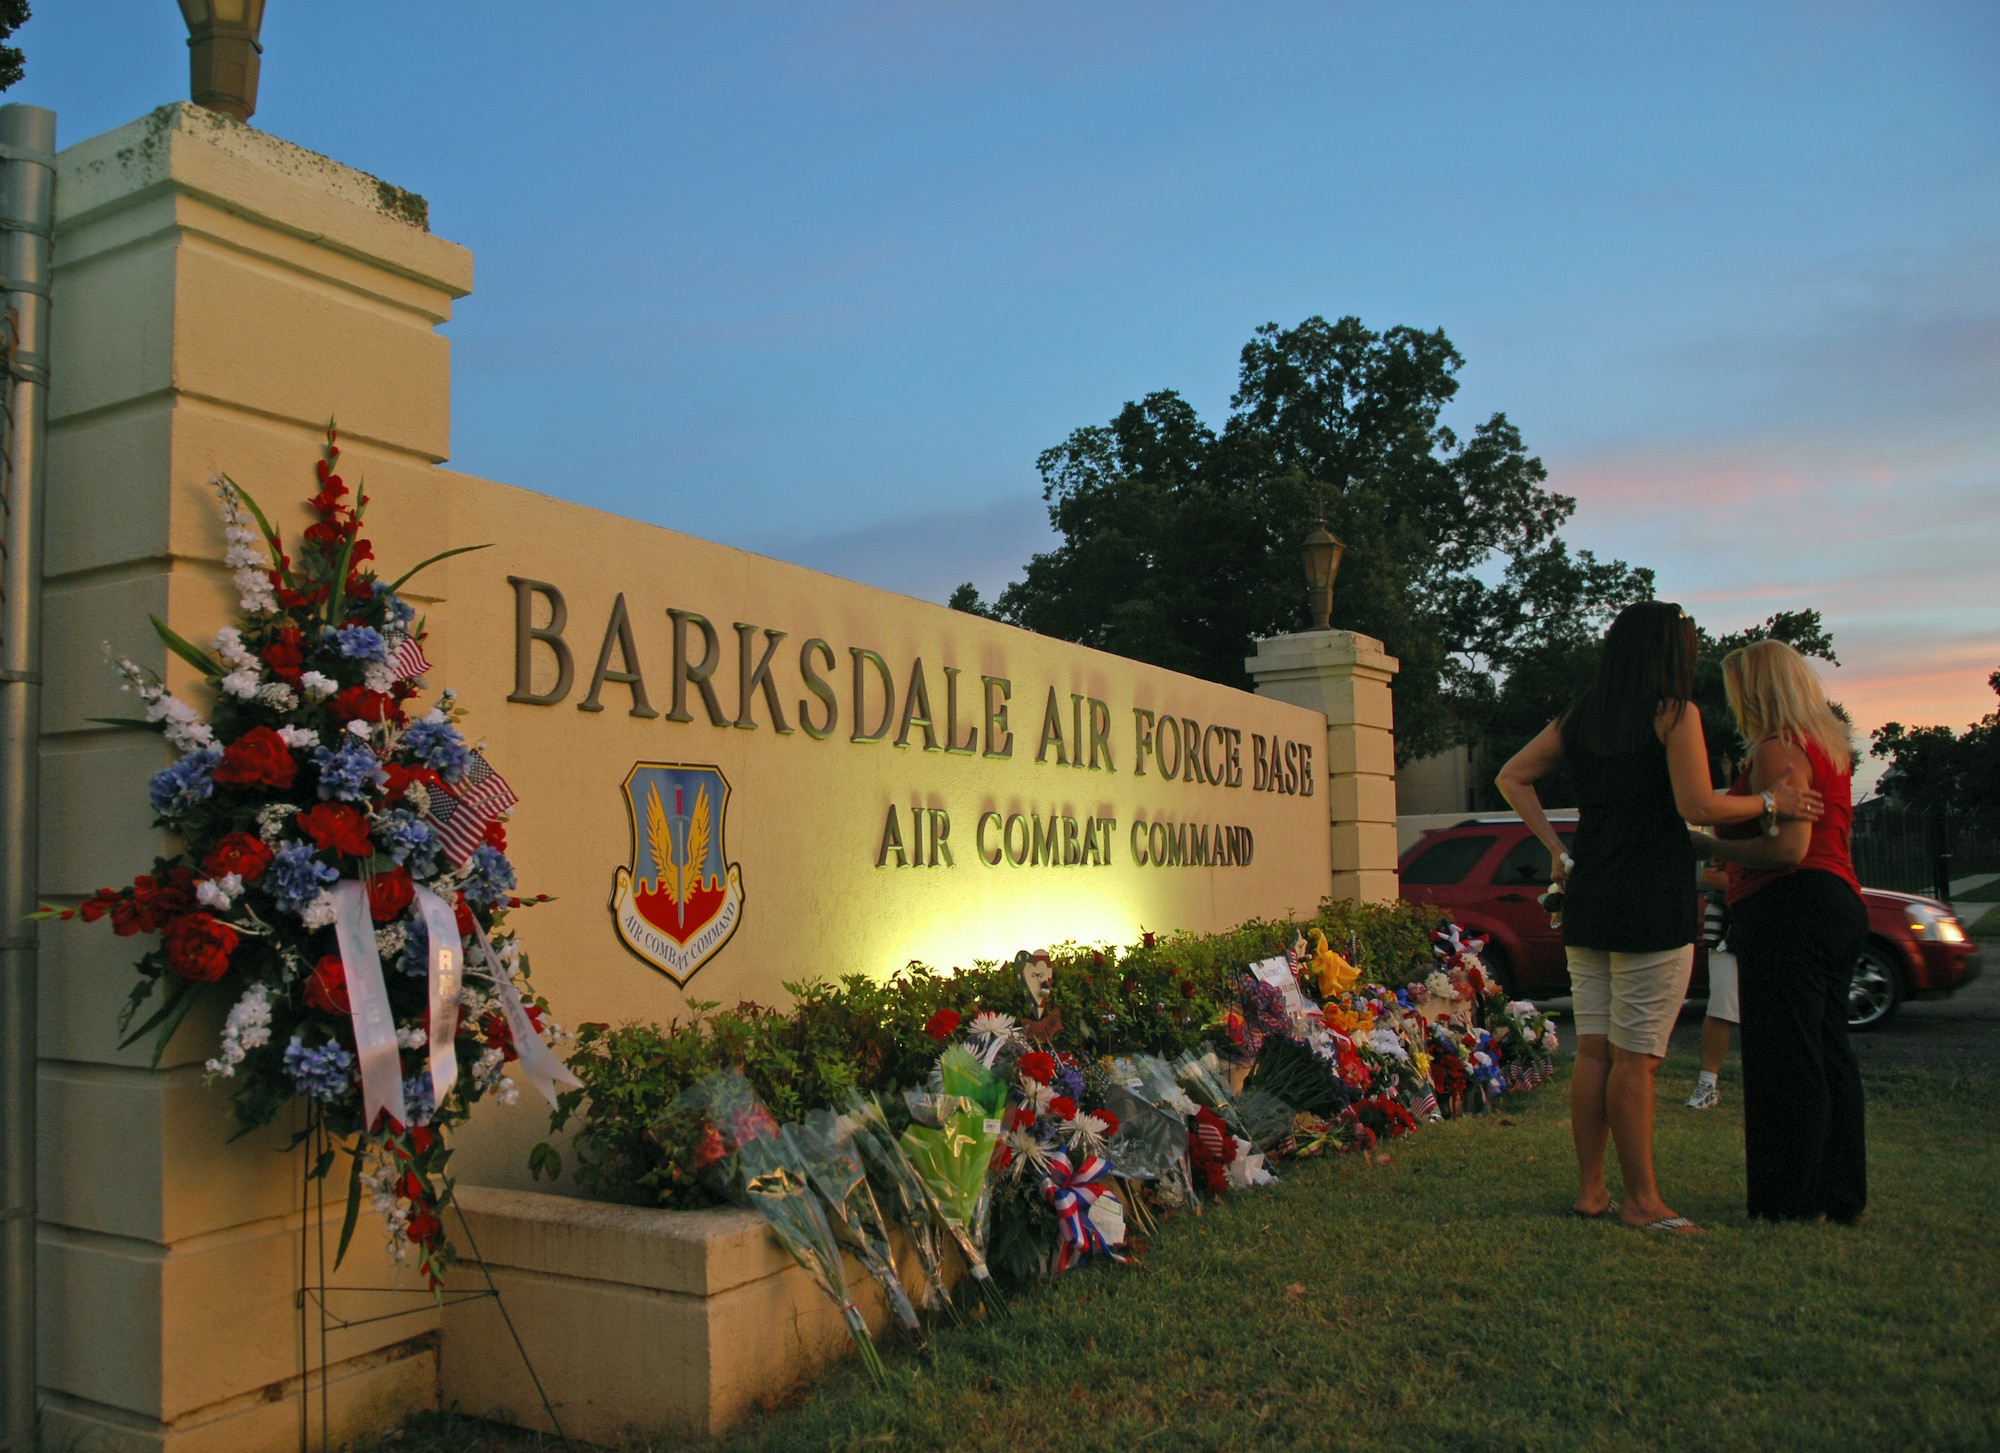 BARKSDALE AIR FORCE BASE, La. -- More than 40 people turned out at dusk Thursday, July 25th, for a candlelight vigil held in honor of the six Airmen of Raider 21.